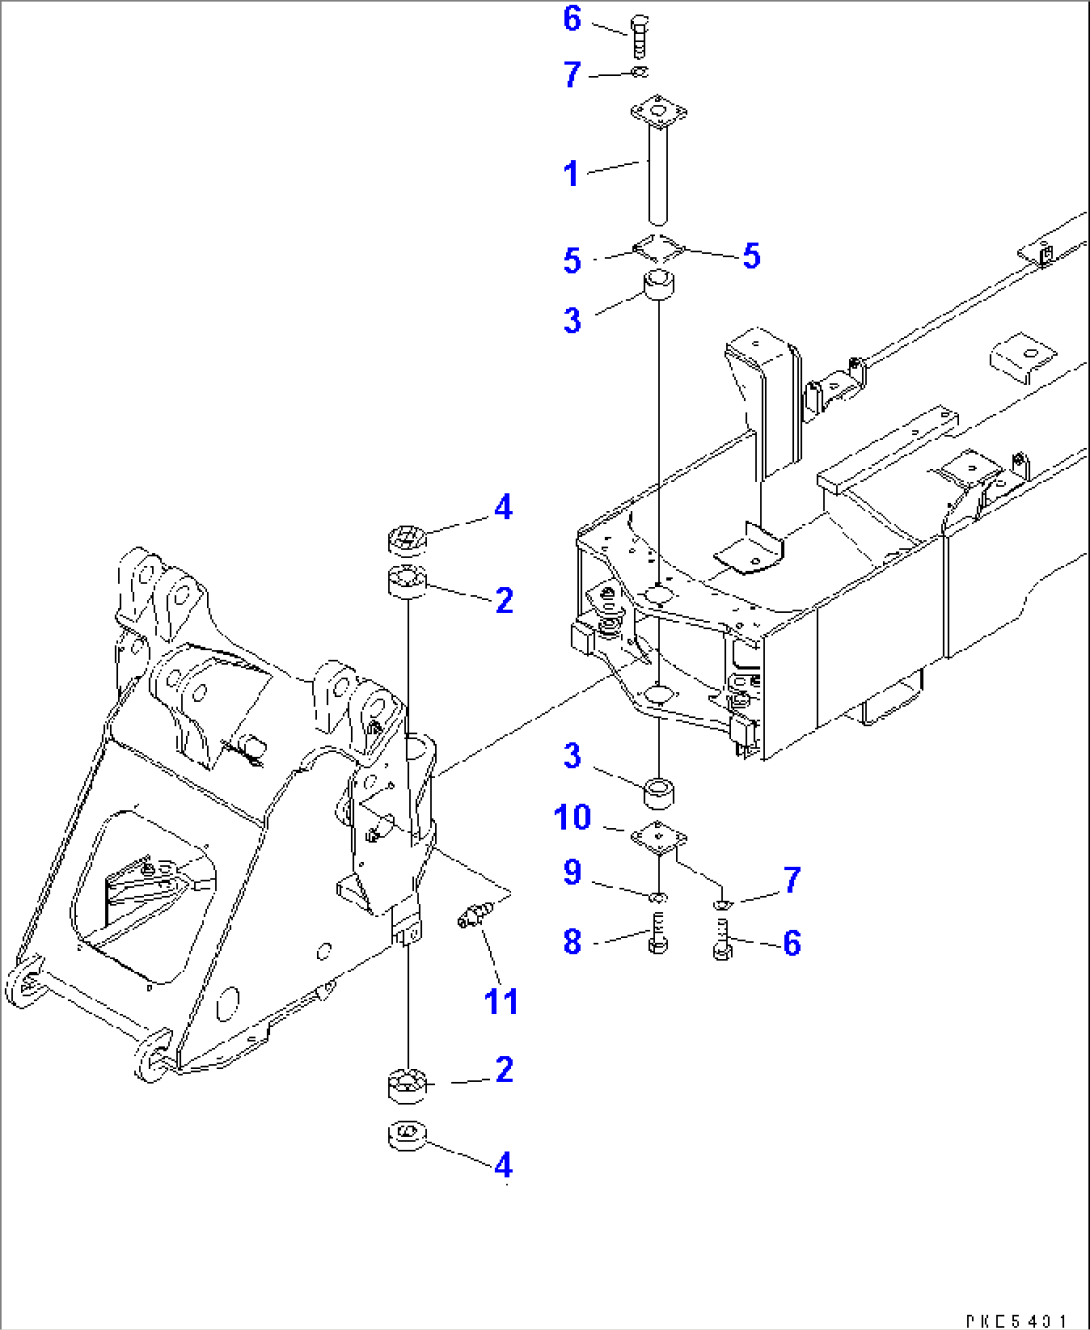 HINGE PIN (FOR FRONT AND REAR FRAME CONNECTING)